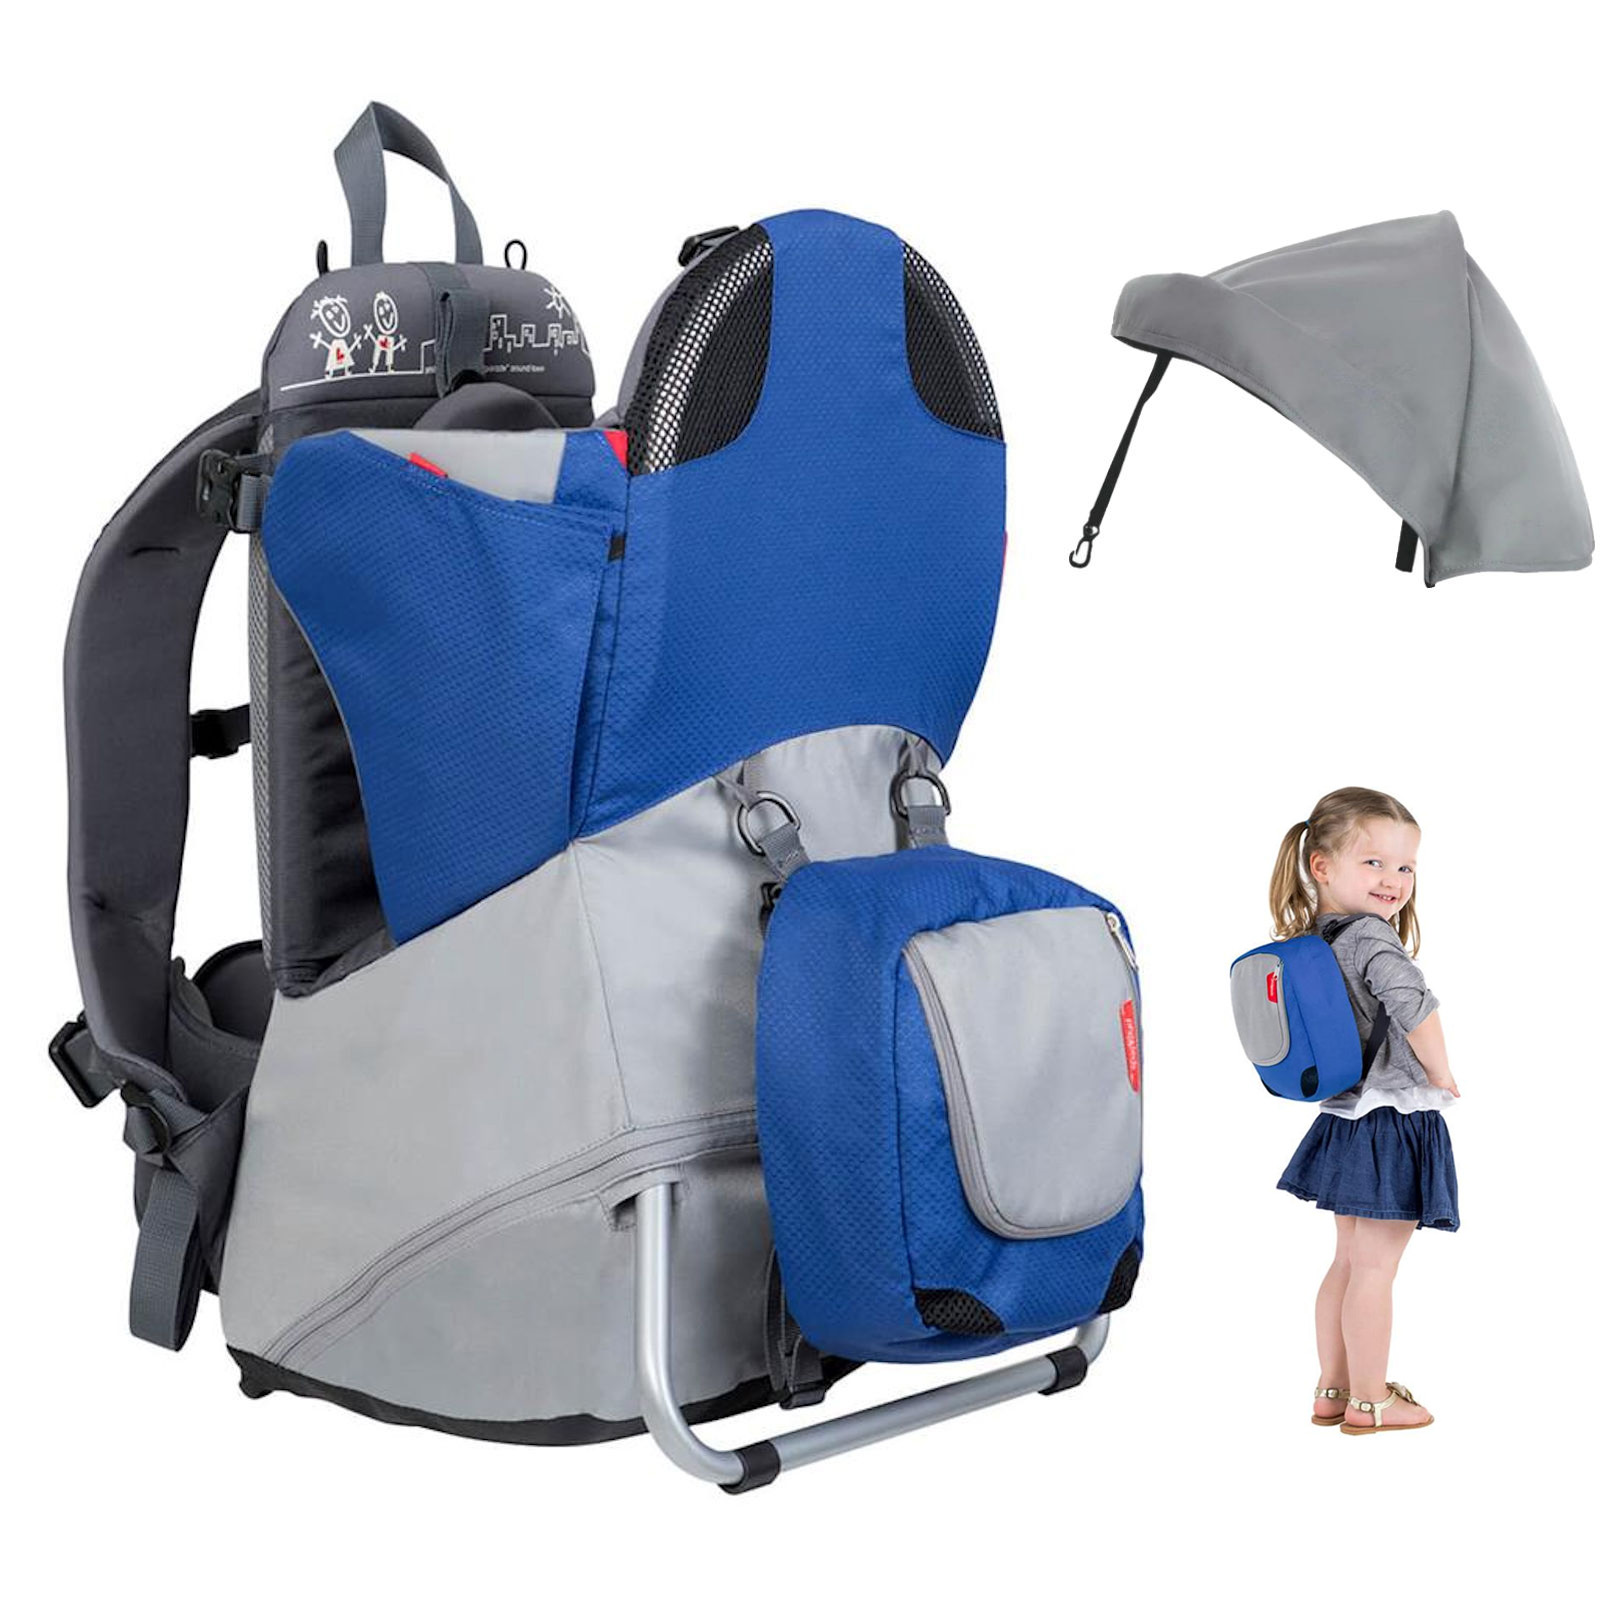 Phil & Teds Parade Baby Carrier with Canopy/Hood - Blue / Grey